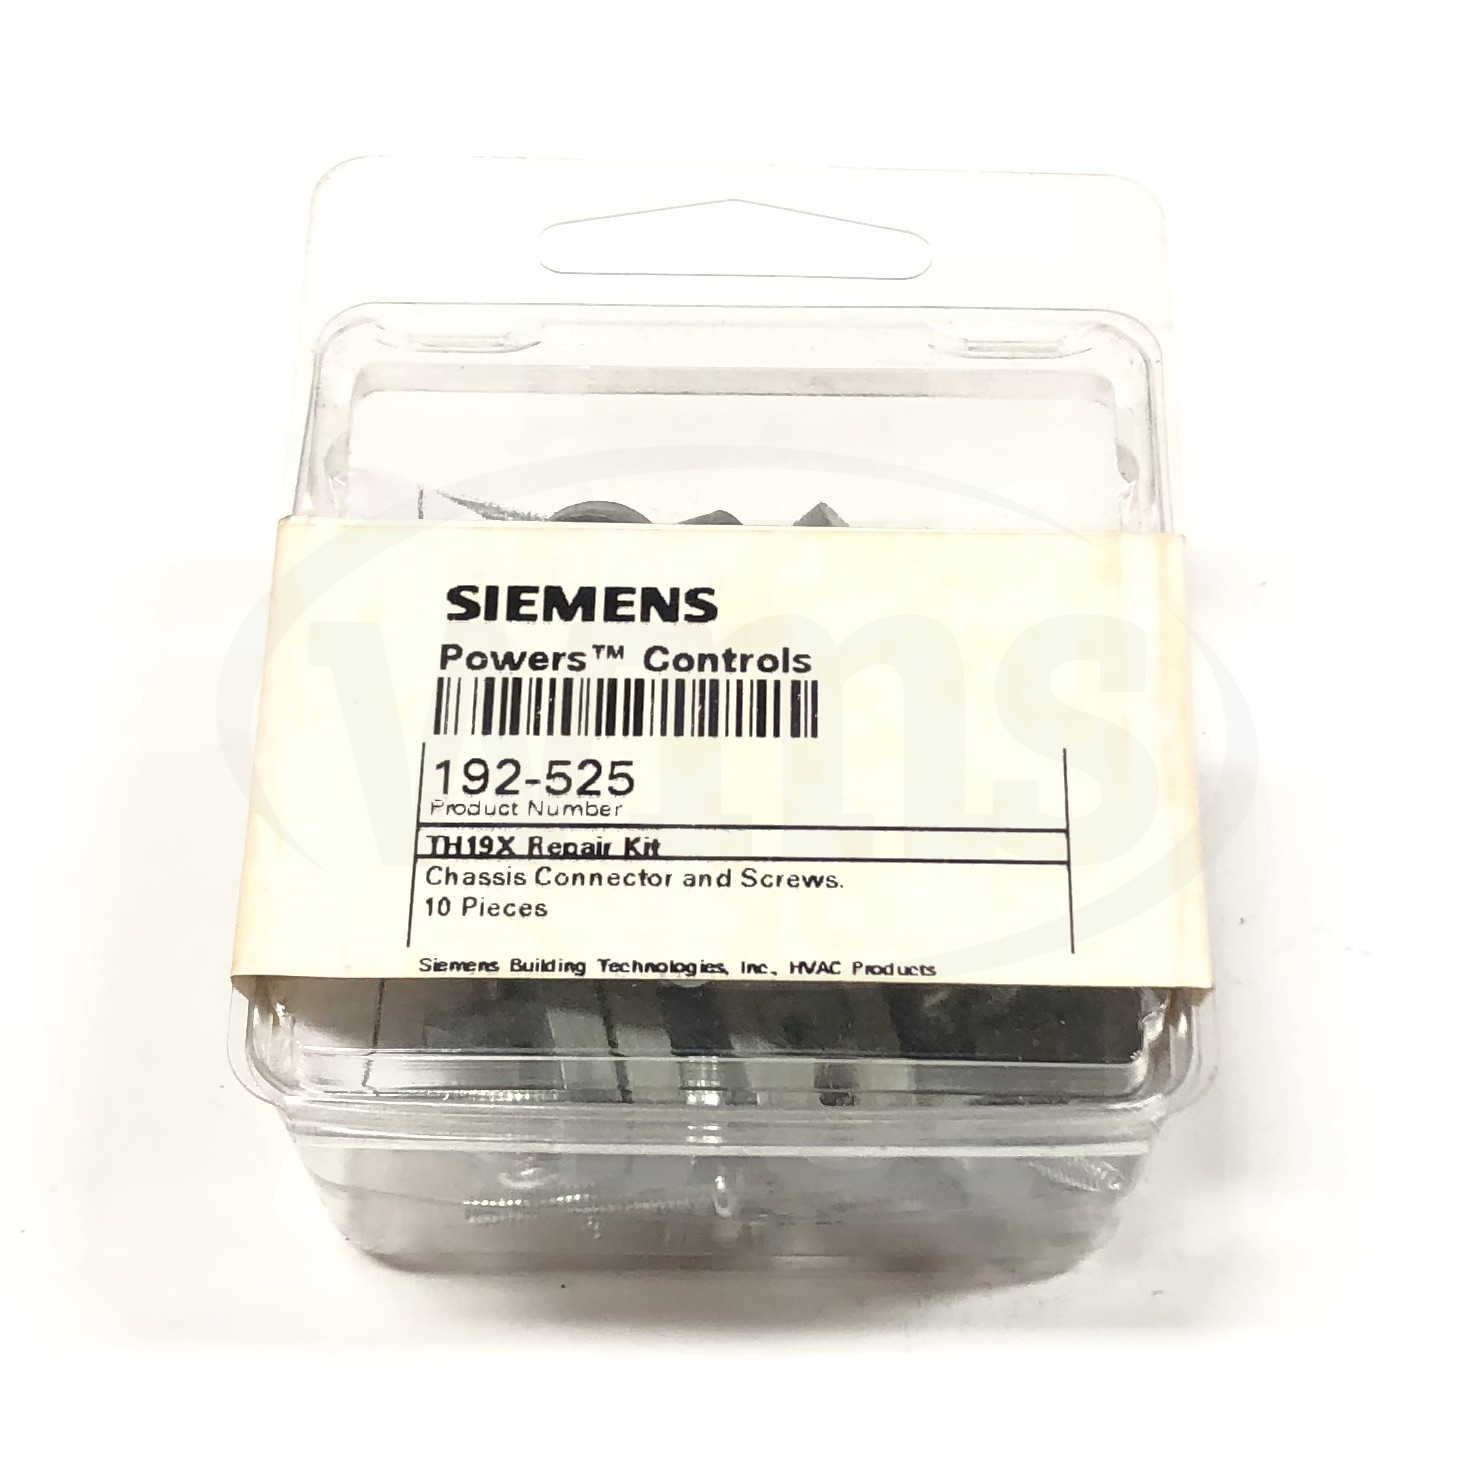 192-525 Siemens TH19X Repair Kit Chassis Connector And Screws 10 Pieces 1